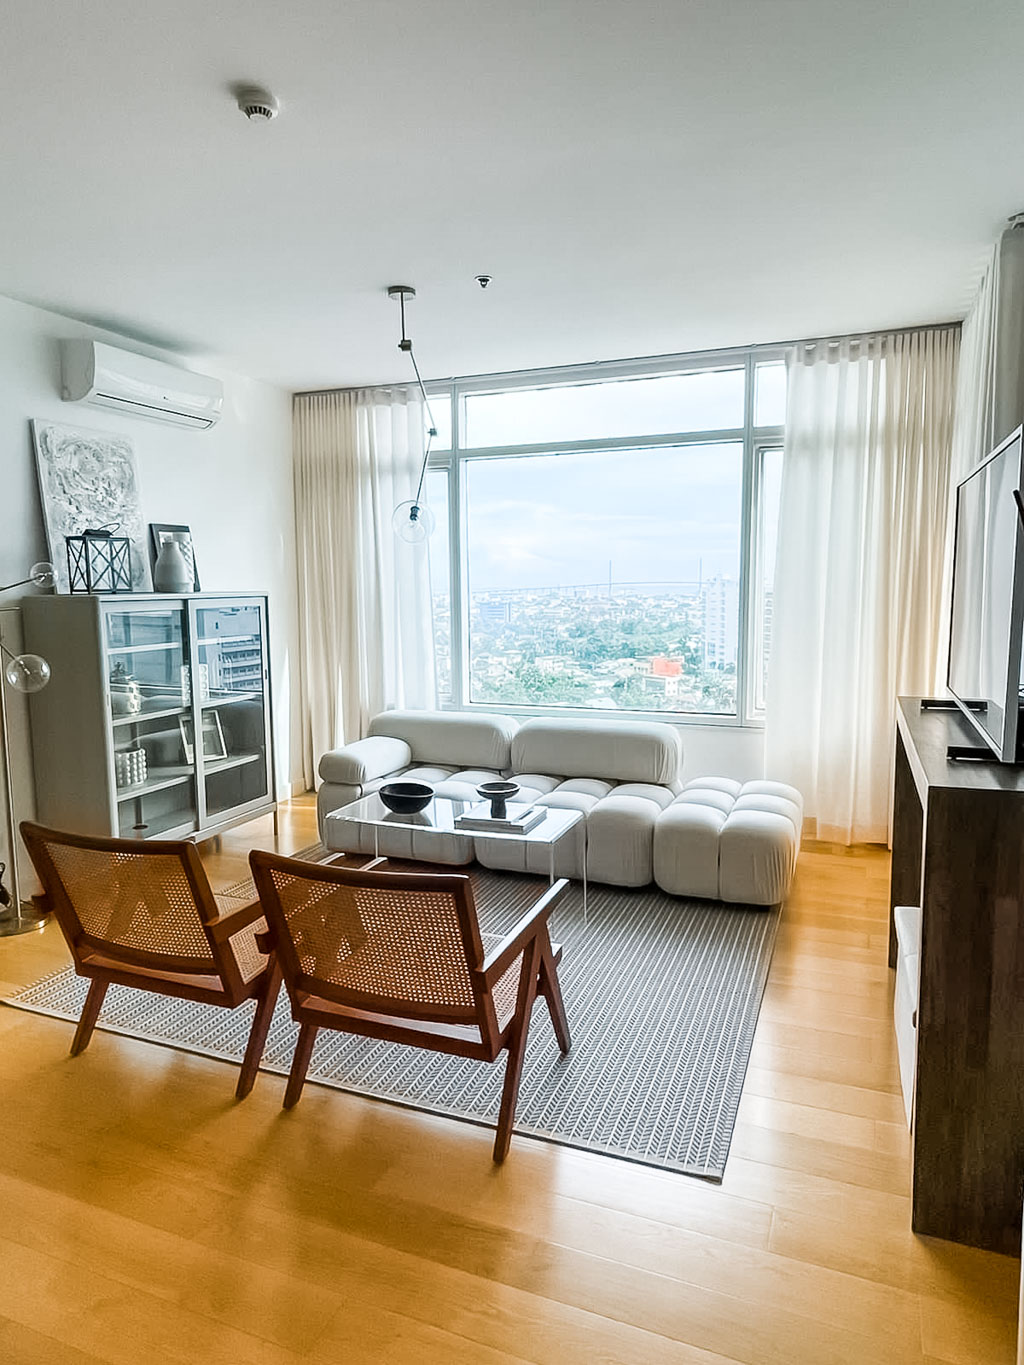 RCTS21 Furnished 2 Bedroom Condo for Rent in 1016 Residences - 1